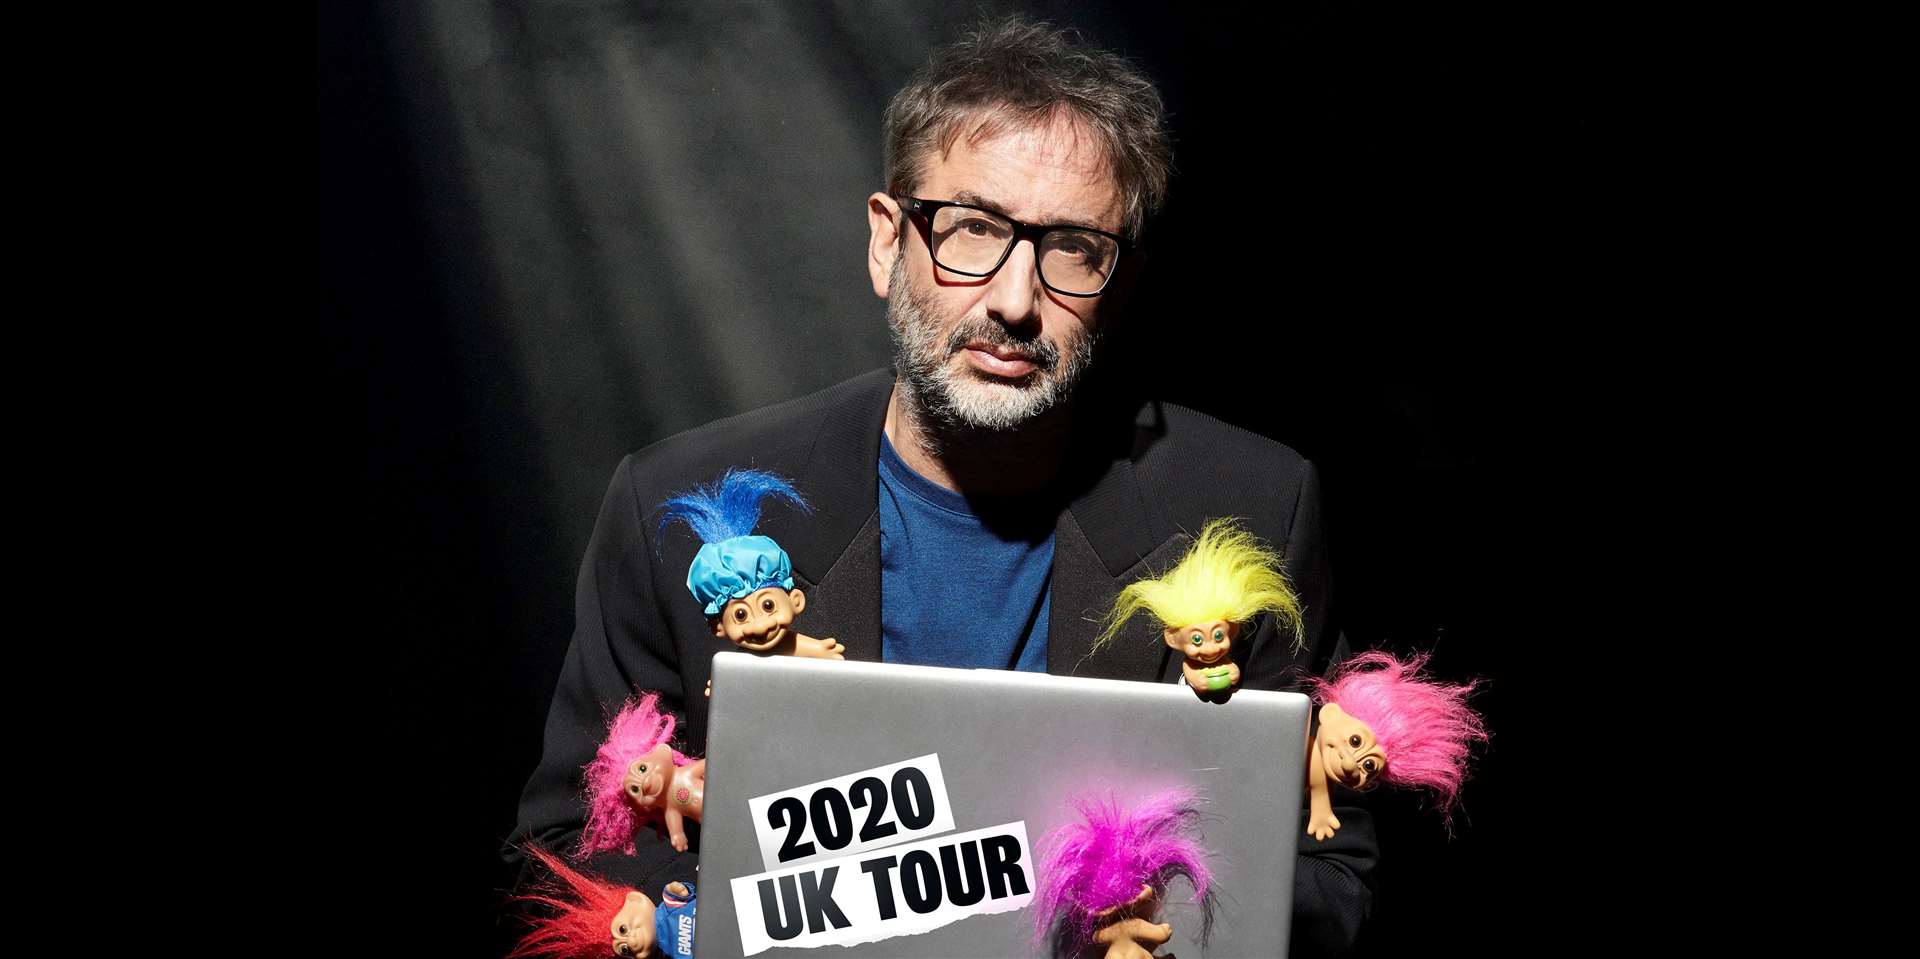 David Baddiel will be at Leas Cliff Hall this weekend, and later at the Orchard Theatre, Dartford